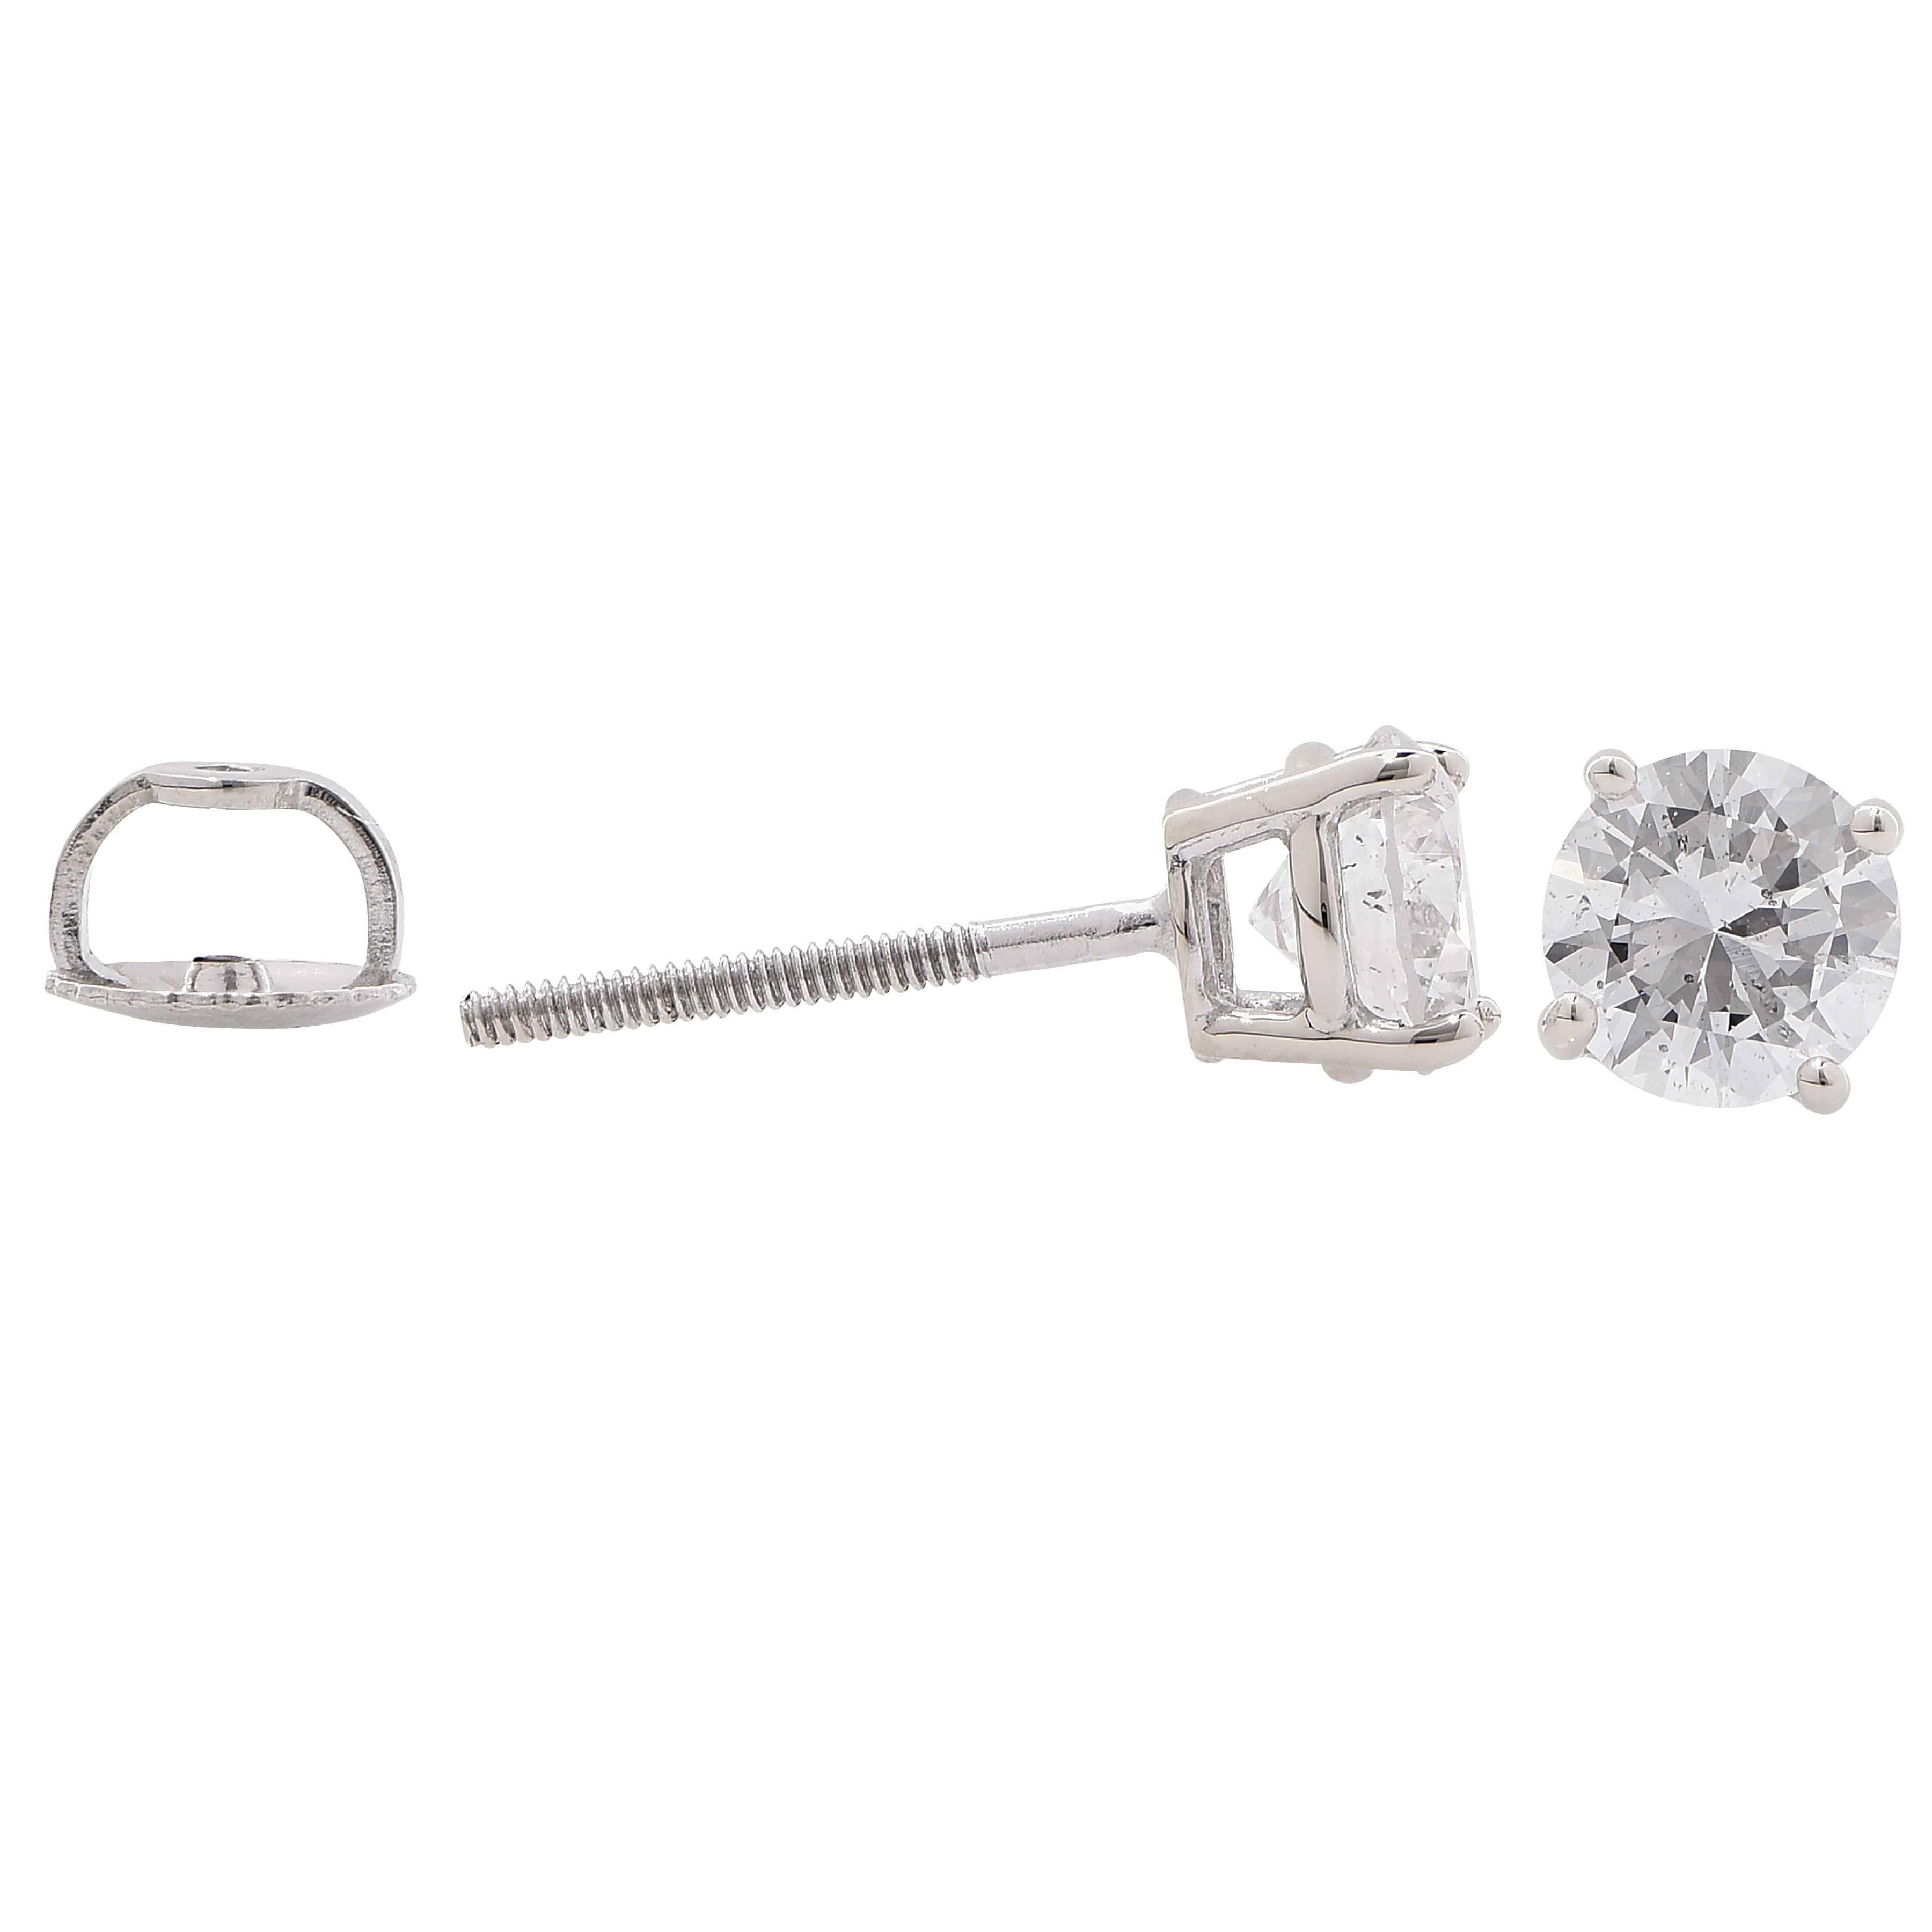 1.2 Carat total weight diamond stud earrings featuring two round brilliant cut diamonds with a total weight of 1.2 carats averaging E color and SI Clarity set in 18 karat white gold.

Metal Type: 18 Carat White Gold Stamped
Metal Weight: 2.5 Grams